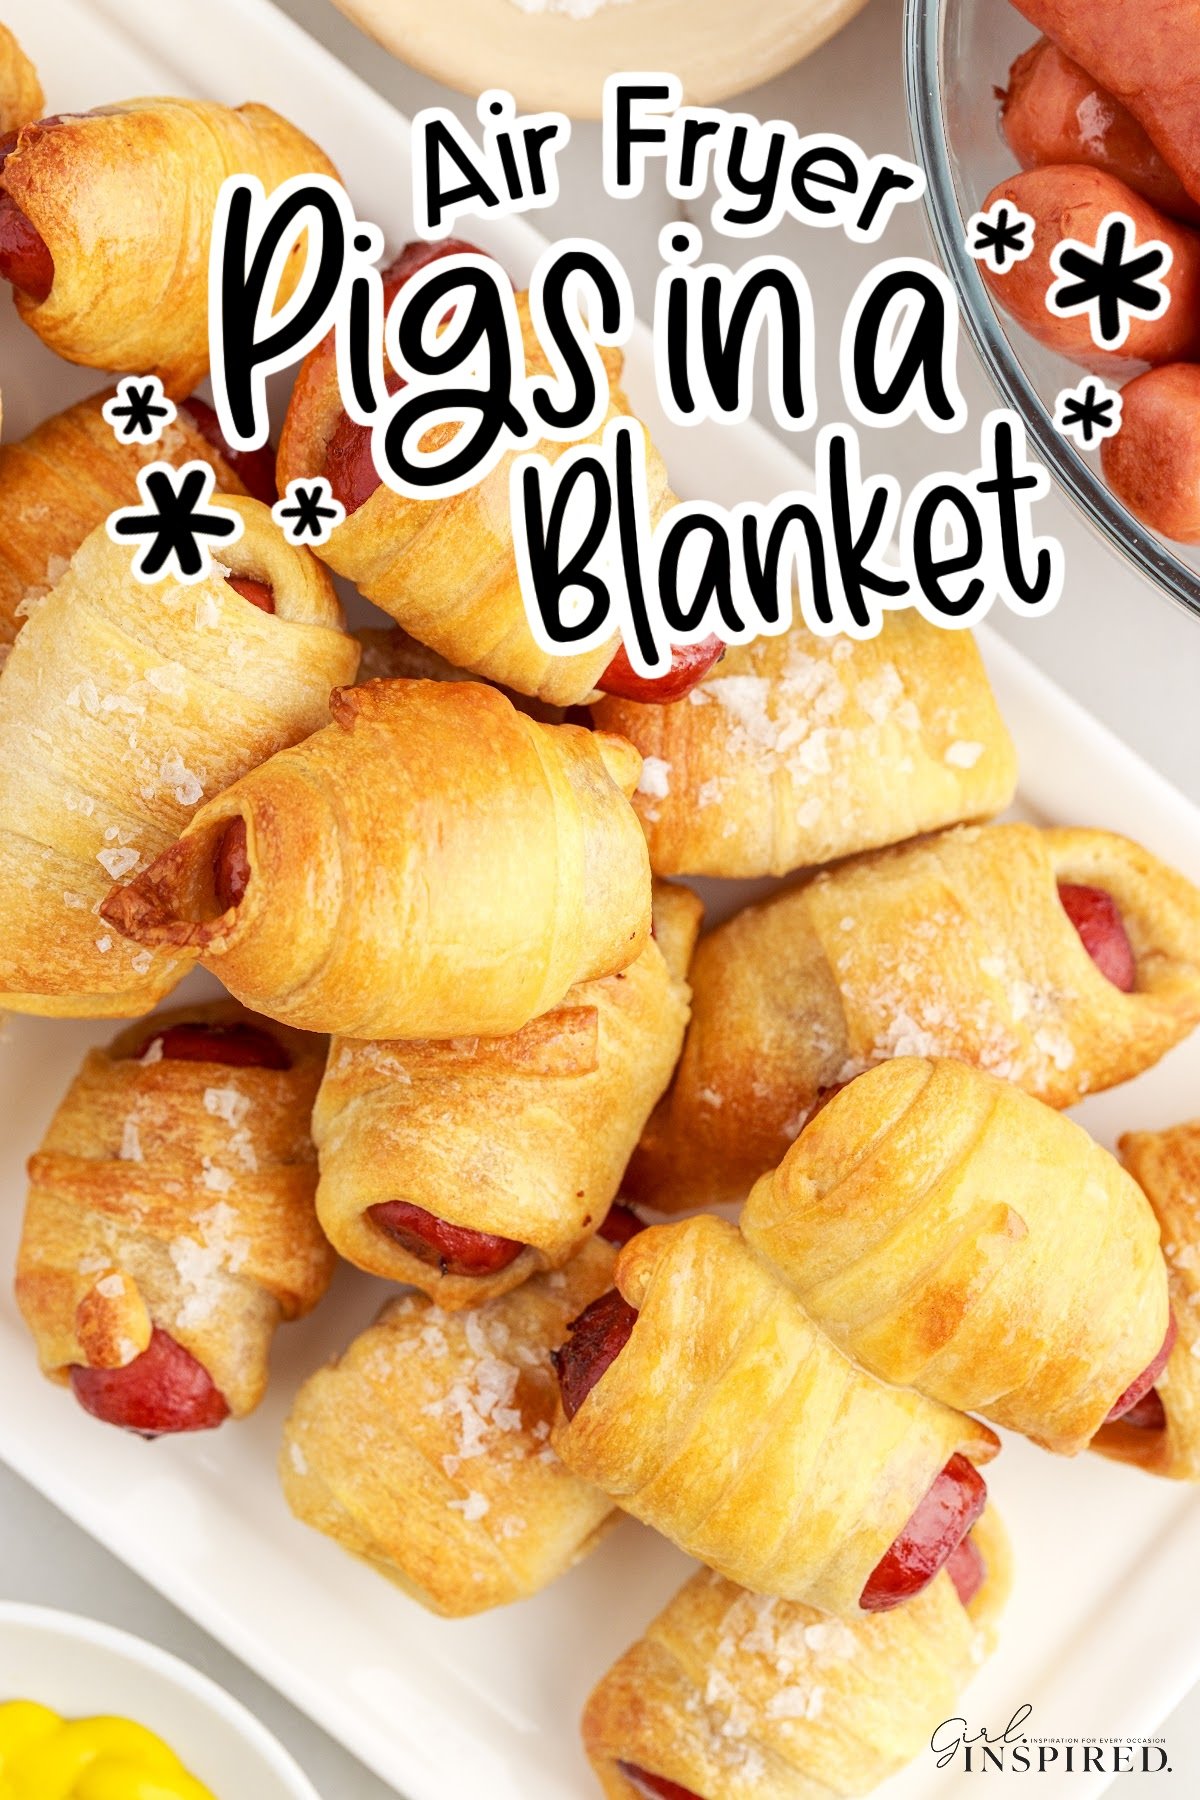 Overhead view of Air Fryer Pigs in a Blanket with text overlay.